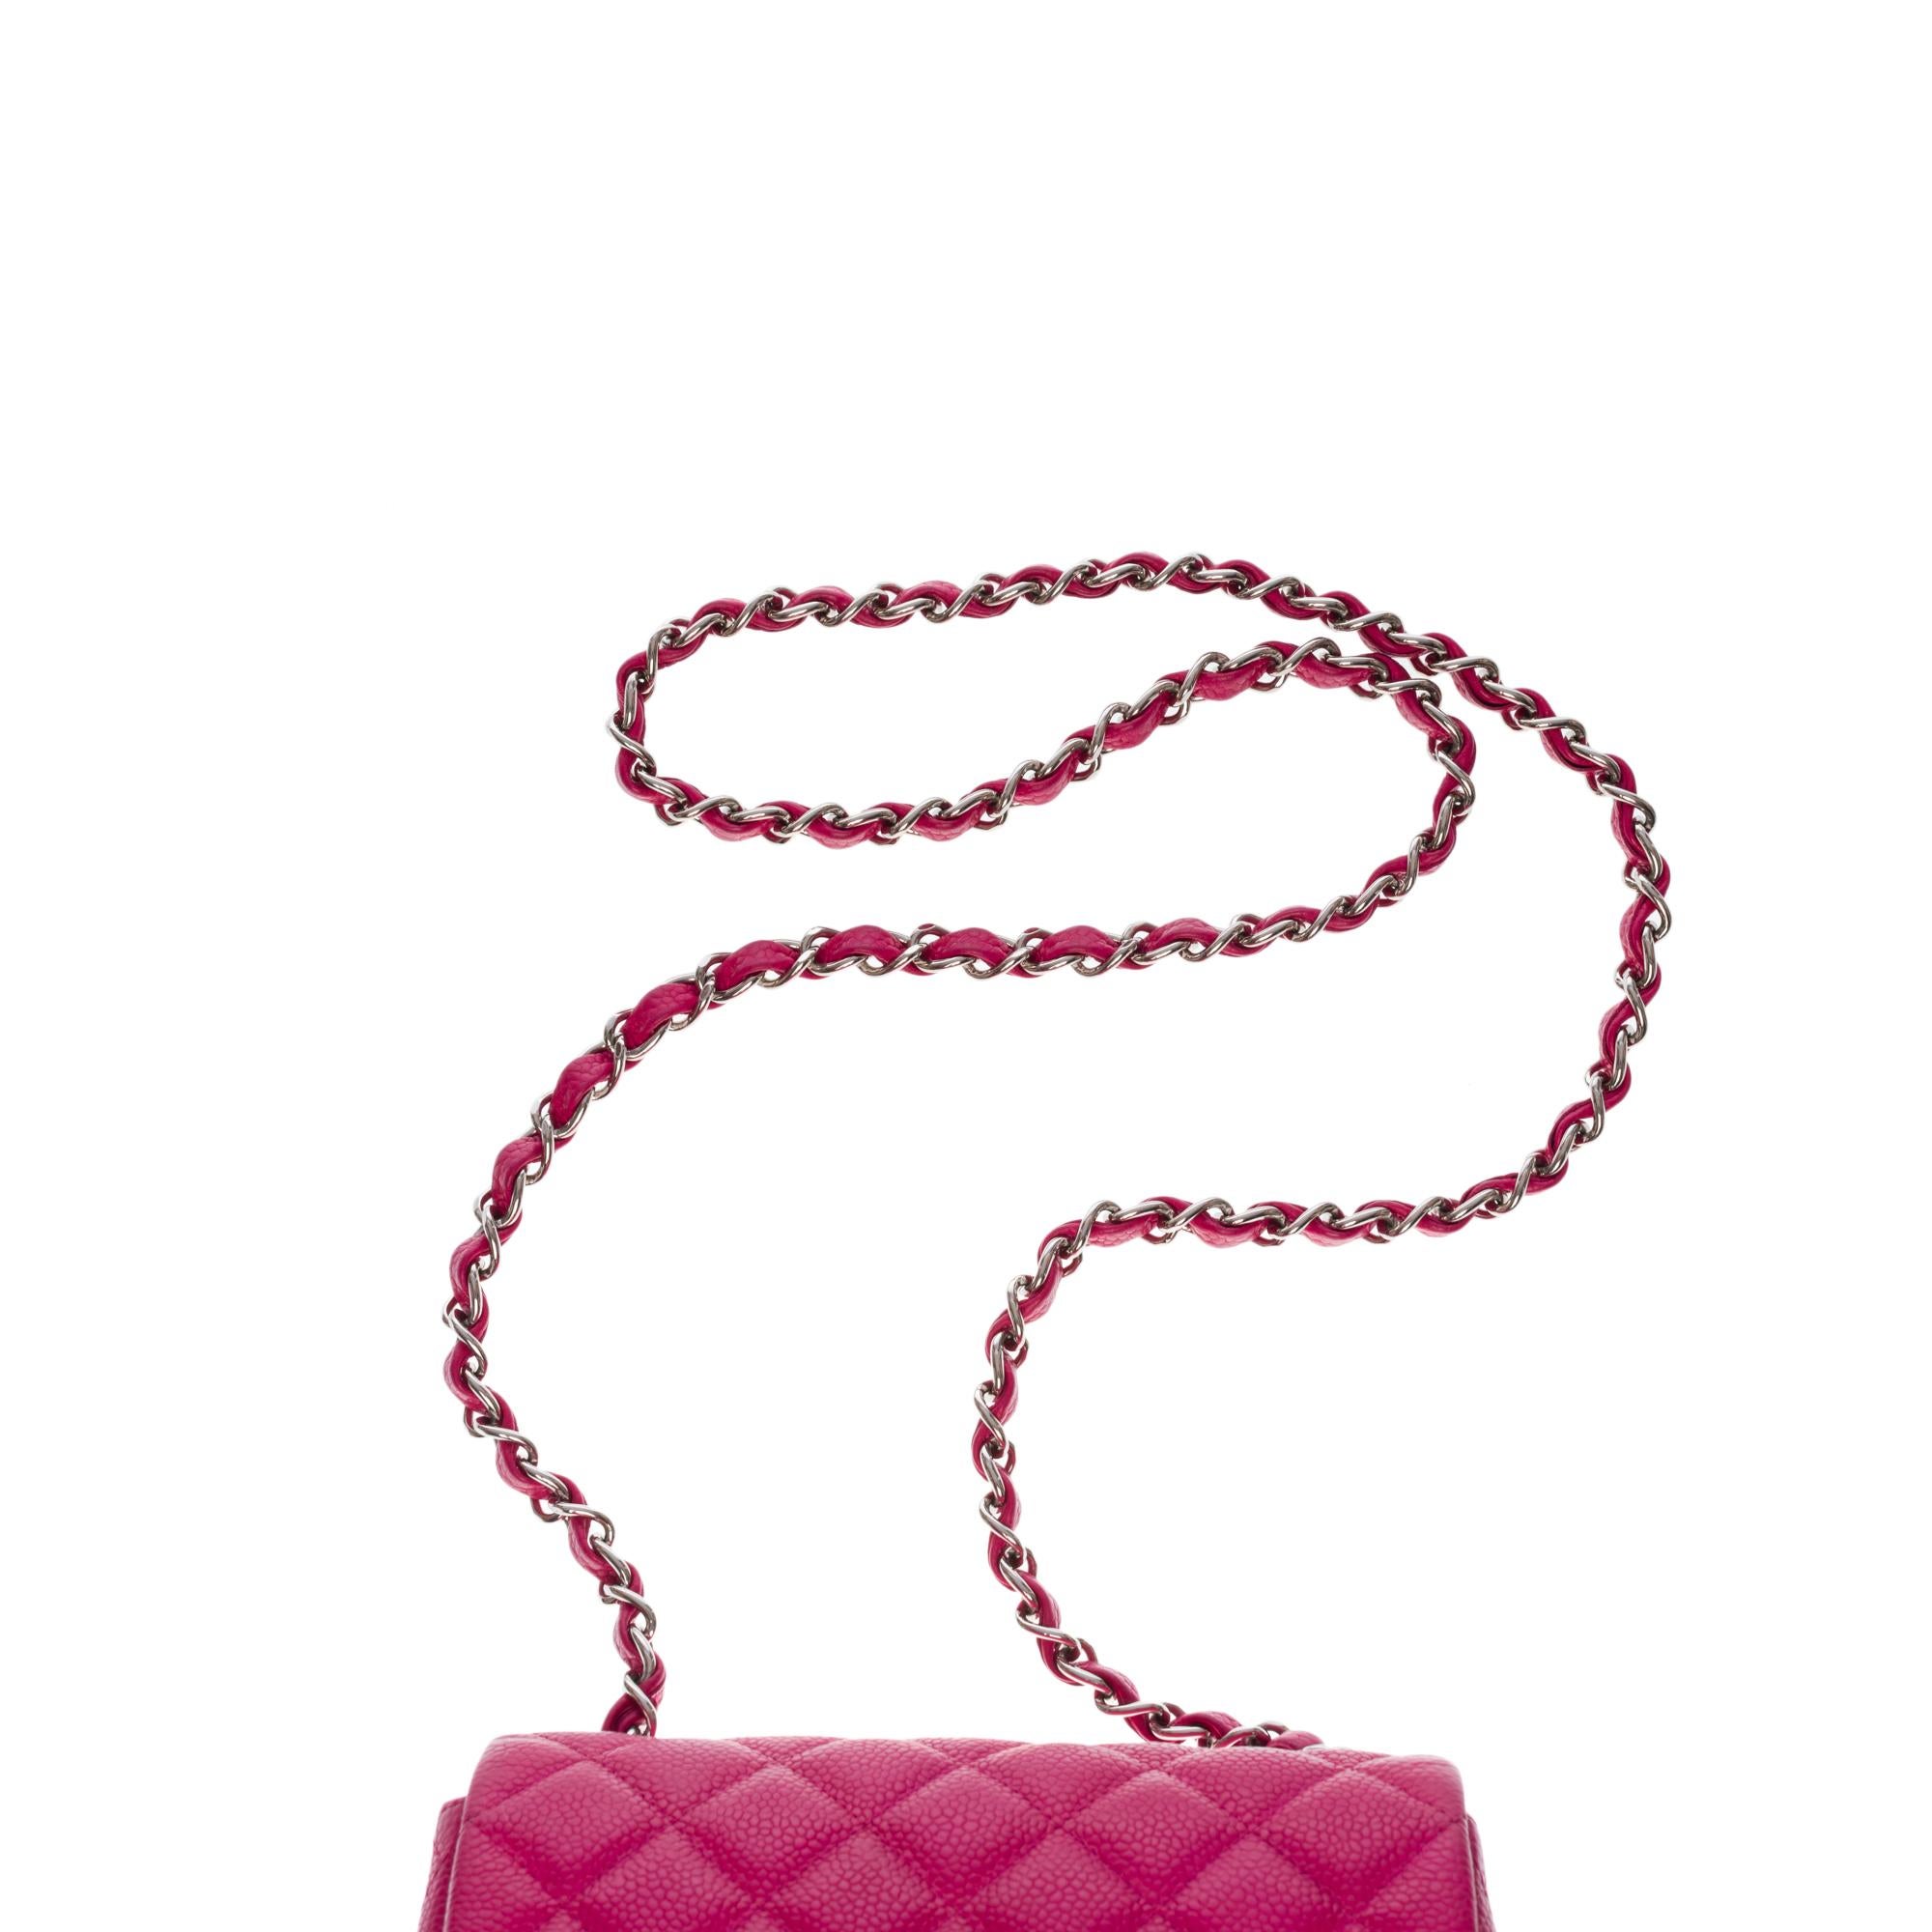 Chanel Mini Timeless Shoulder bag in Pink caviar quilted leather, SHW 2